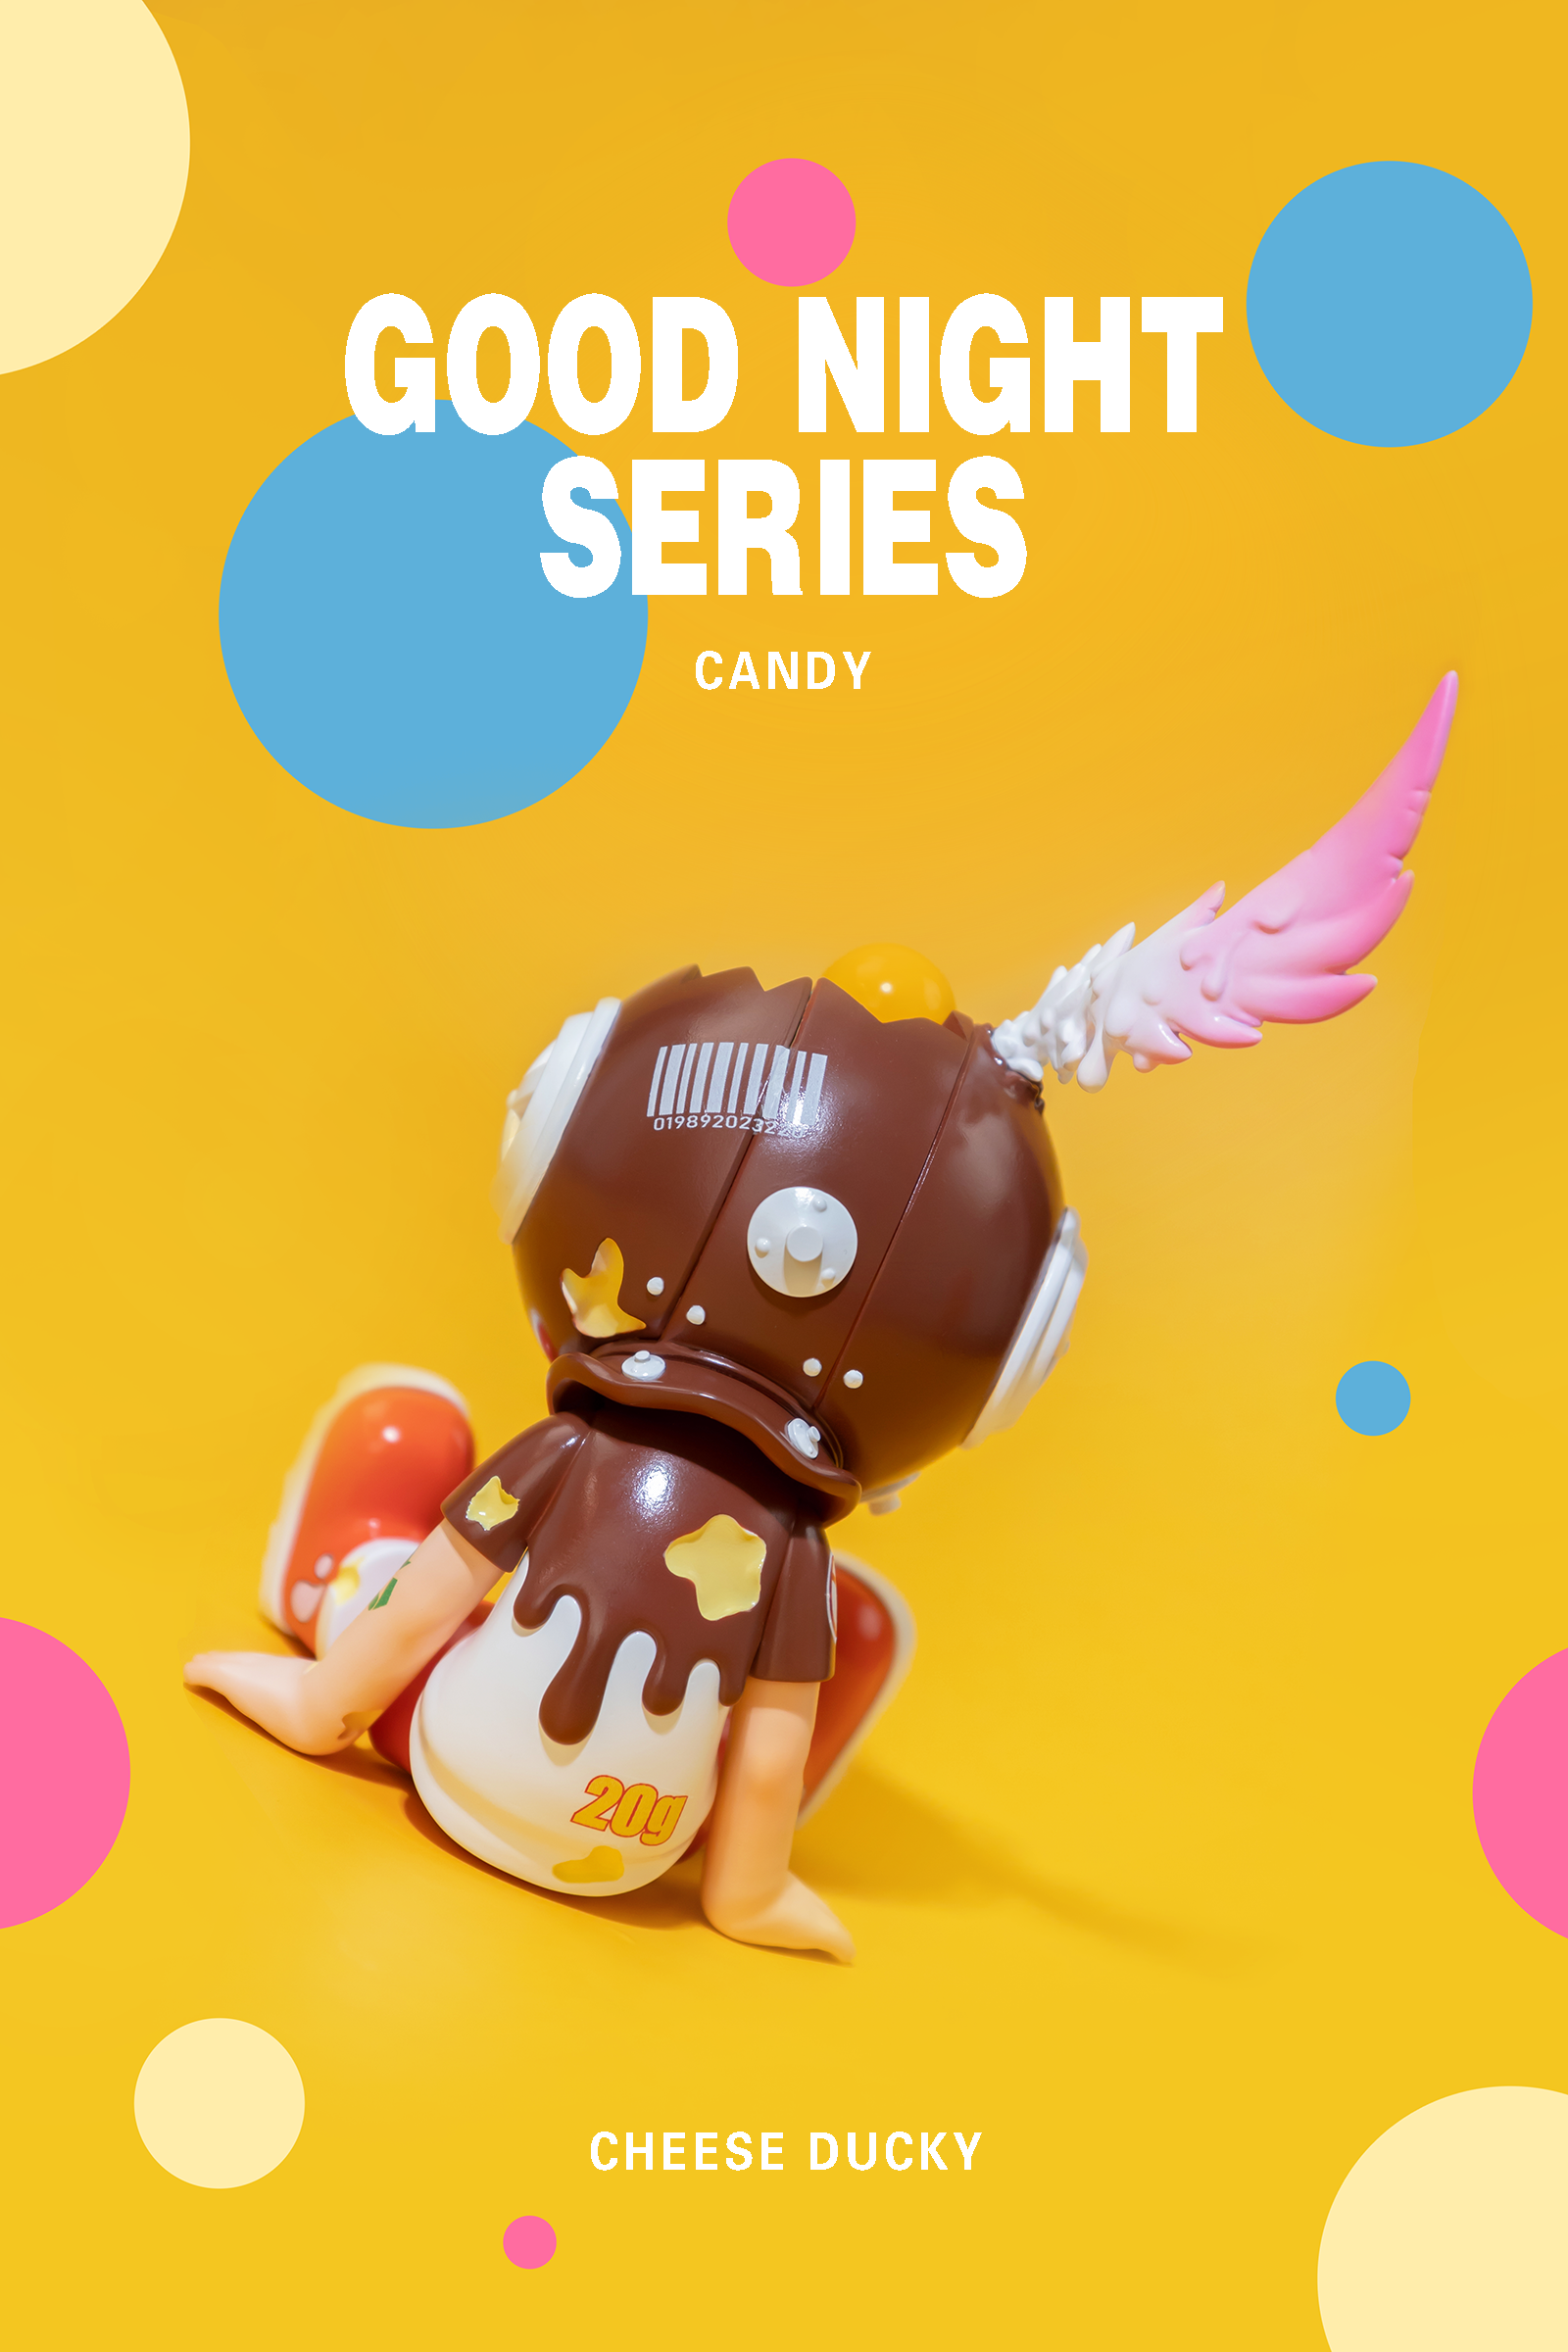 Good Night Series-Candy-Cheese Ducky - Preorder